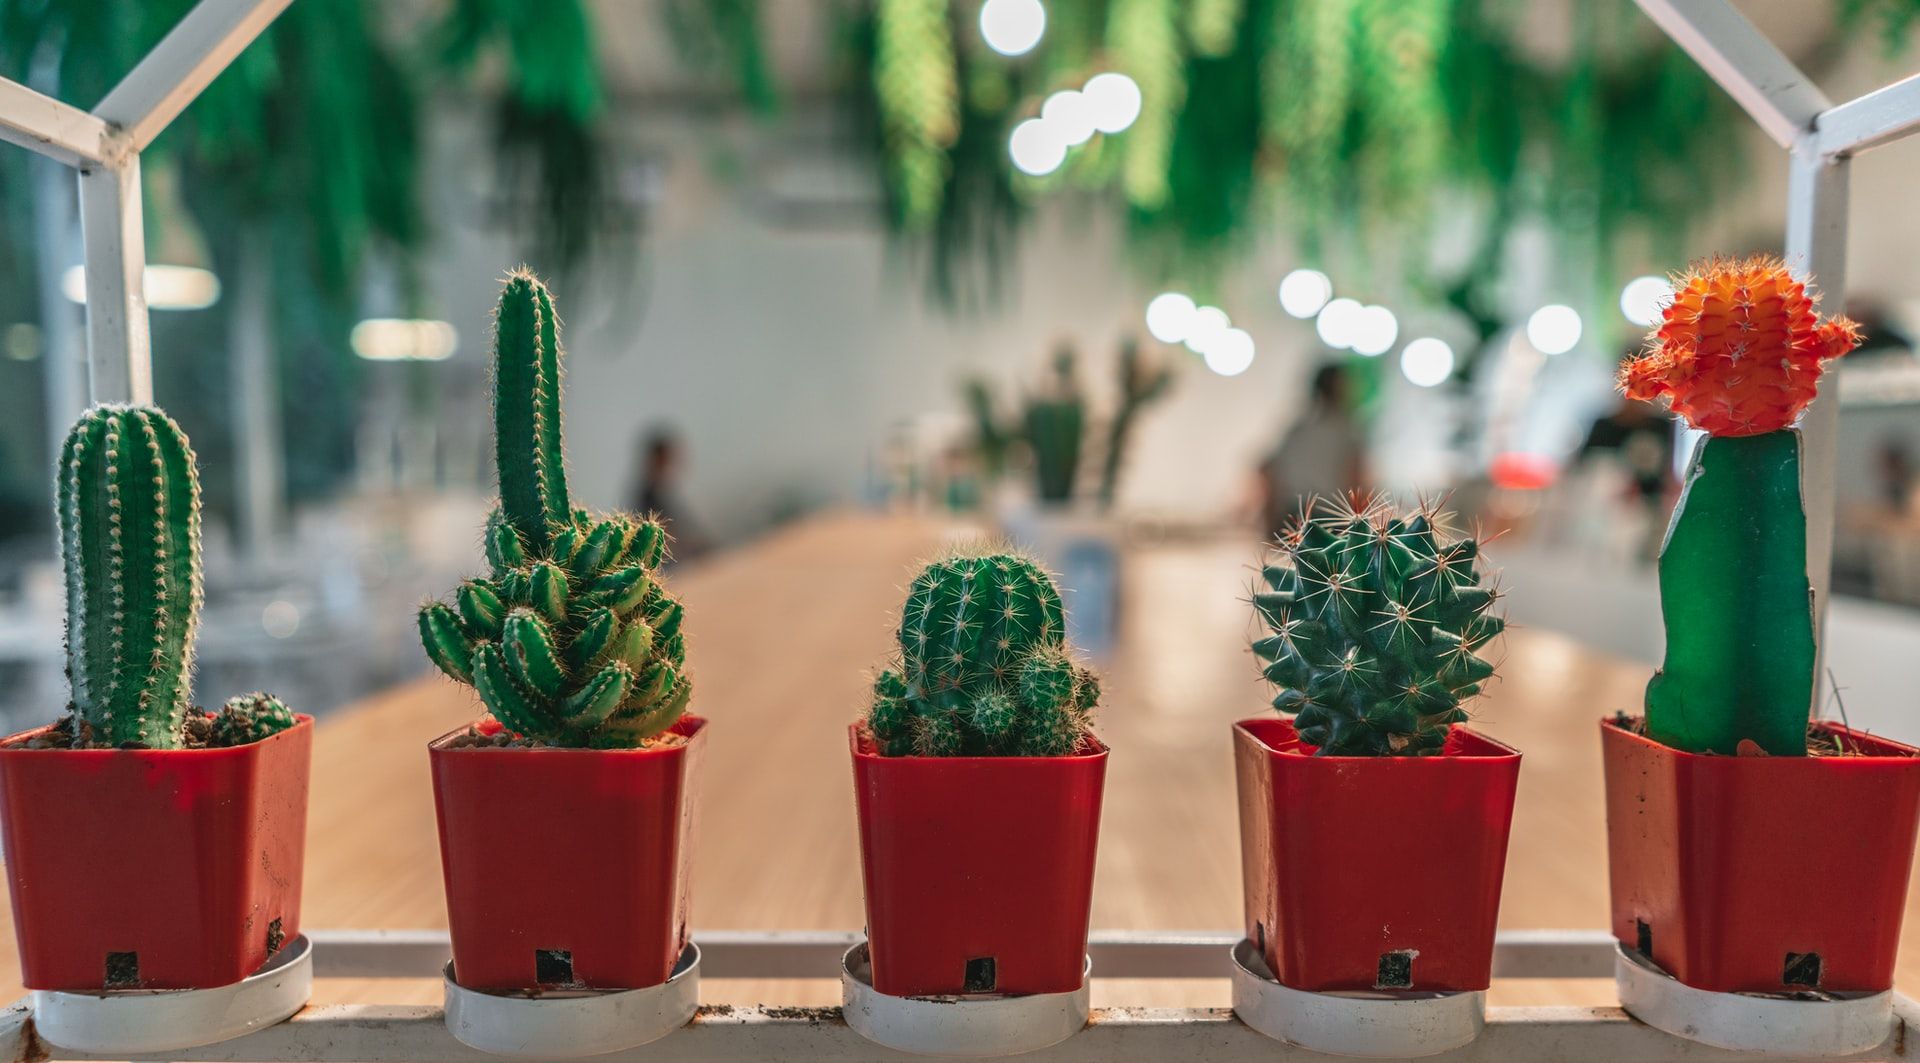 Not just for decoration, here are 10 benefits of cactus for health